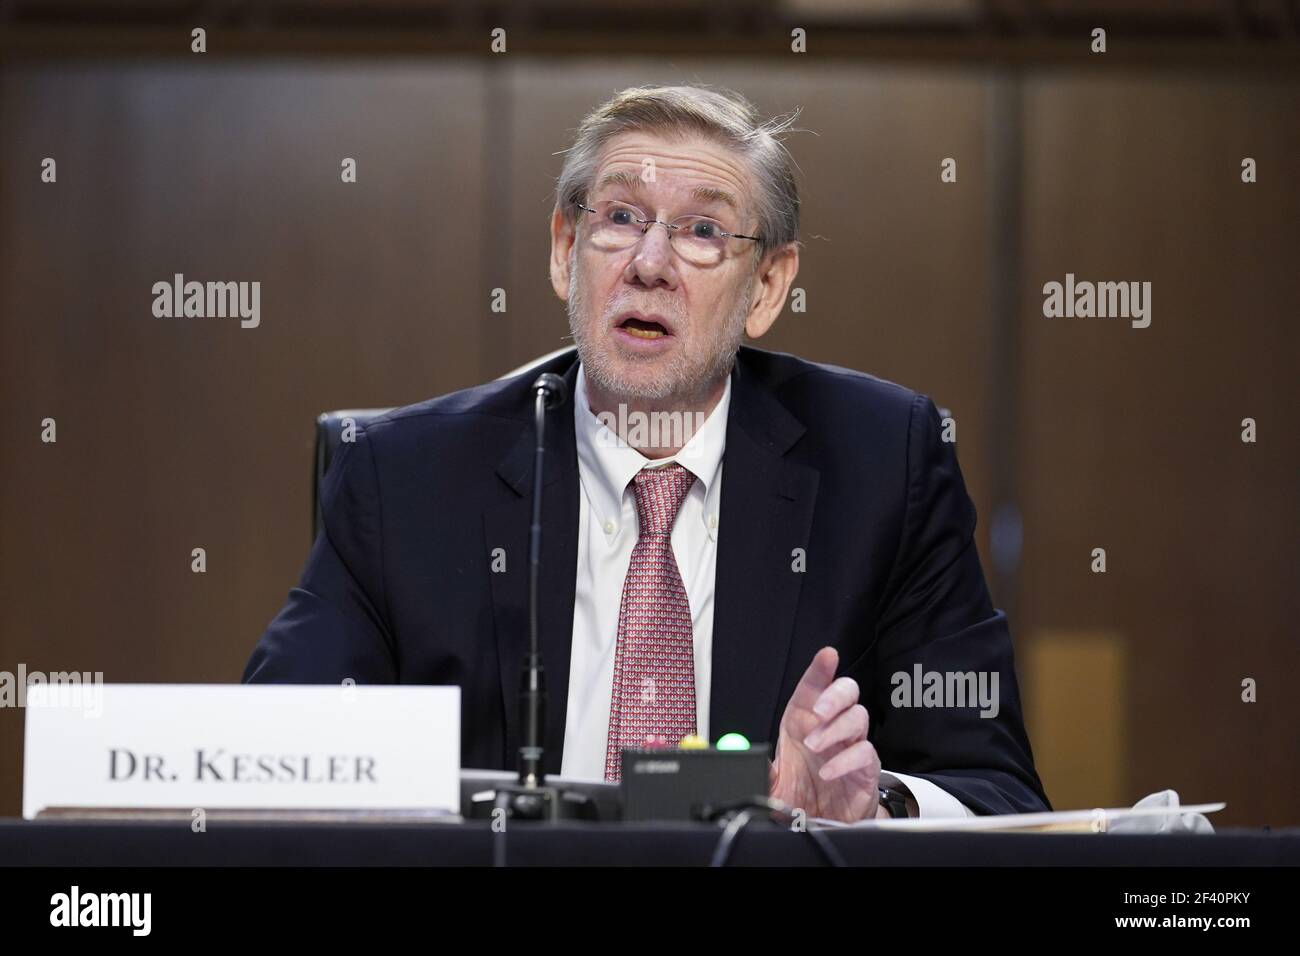 Washington, United States. 18th Mar, 2021. Dr. David Kessler, Chief Science Officer of the White House COVID-19 response team, testifies during a Senate Health, Education, Labor and Pensions Committee hearing on the federal coronavirus response on Capitol Hill in Washington March 18th, 2021. Pool Photo by Susan Walsh/UPI Credit: UPI/Alamy Live News Stock Photo